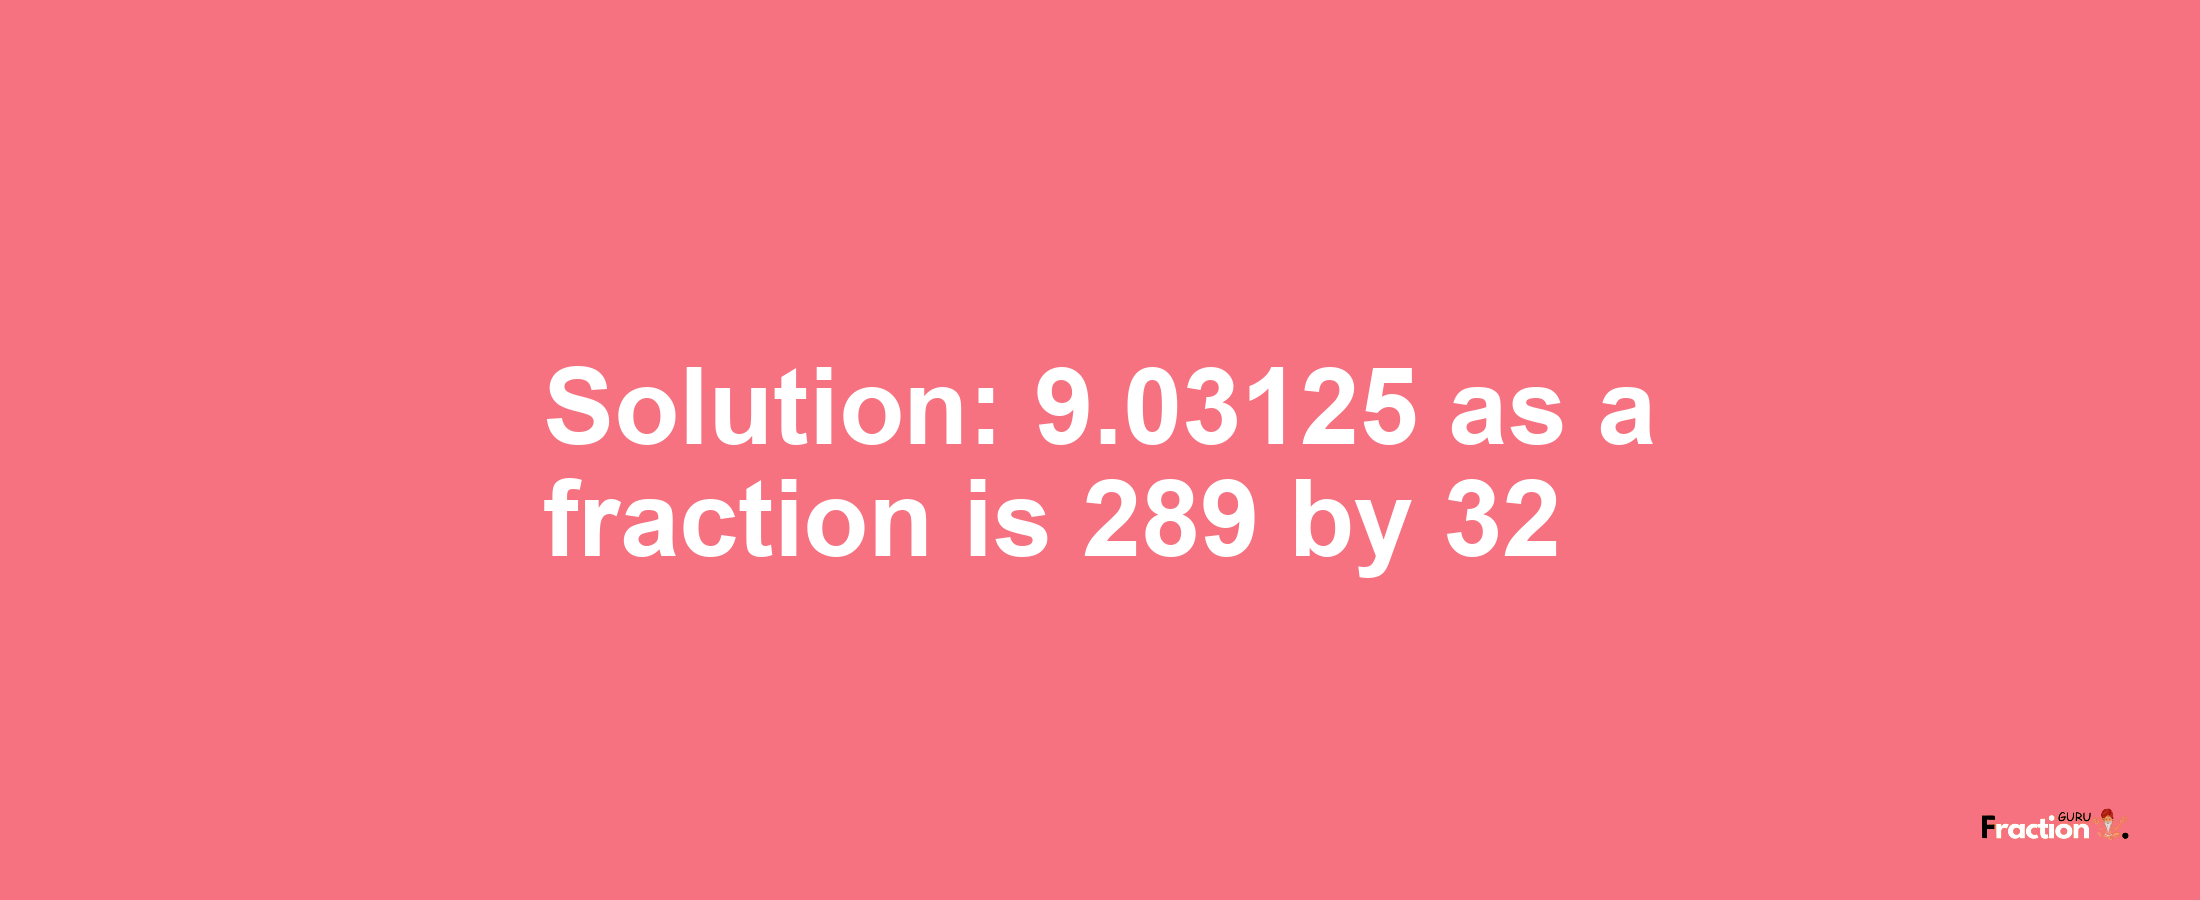 Solution:9.03125 as a fraction is 289/32